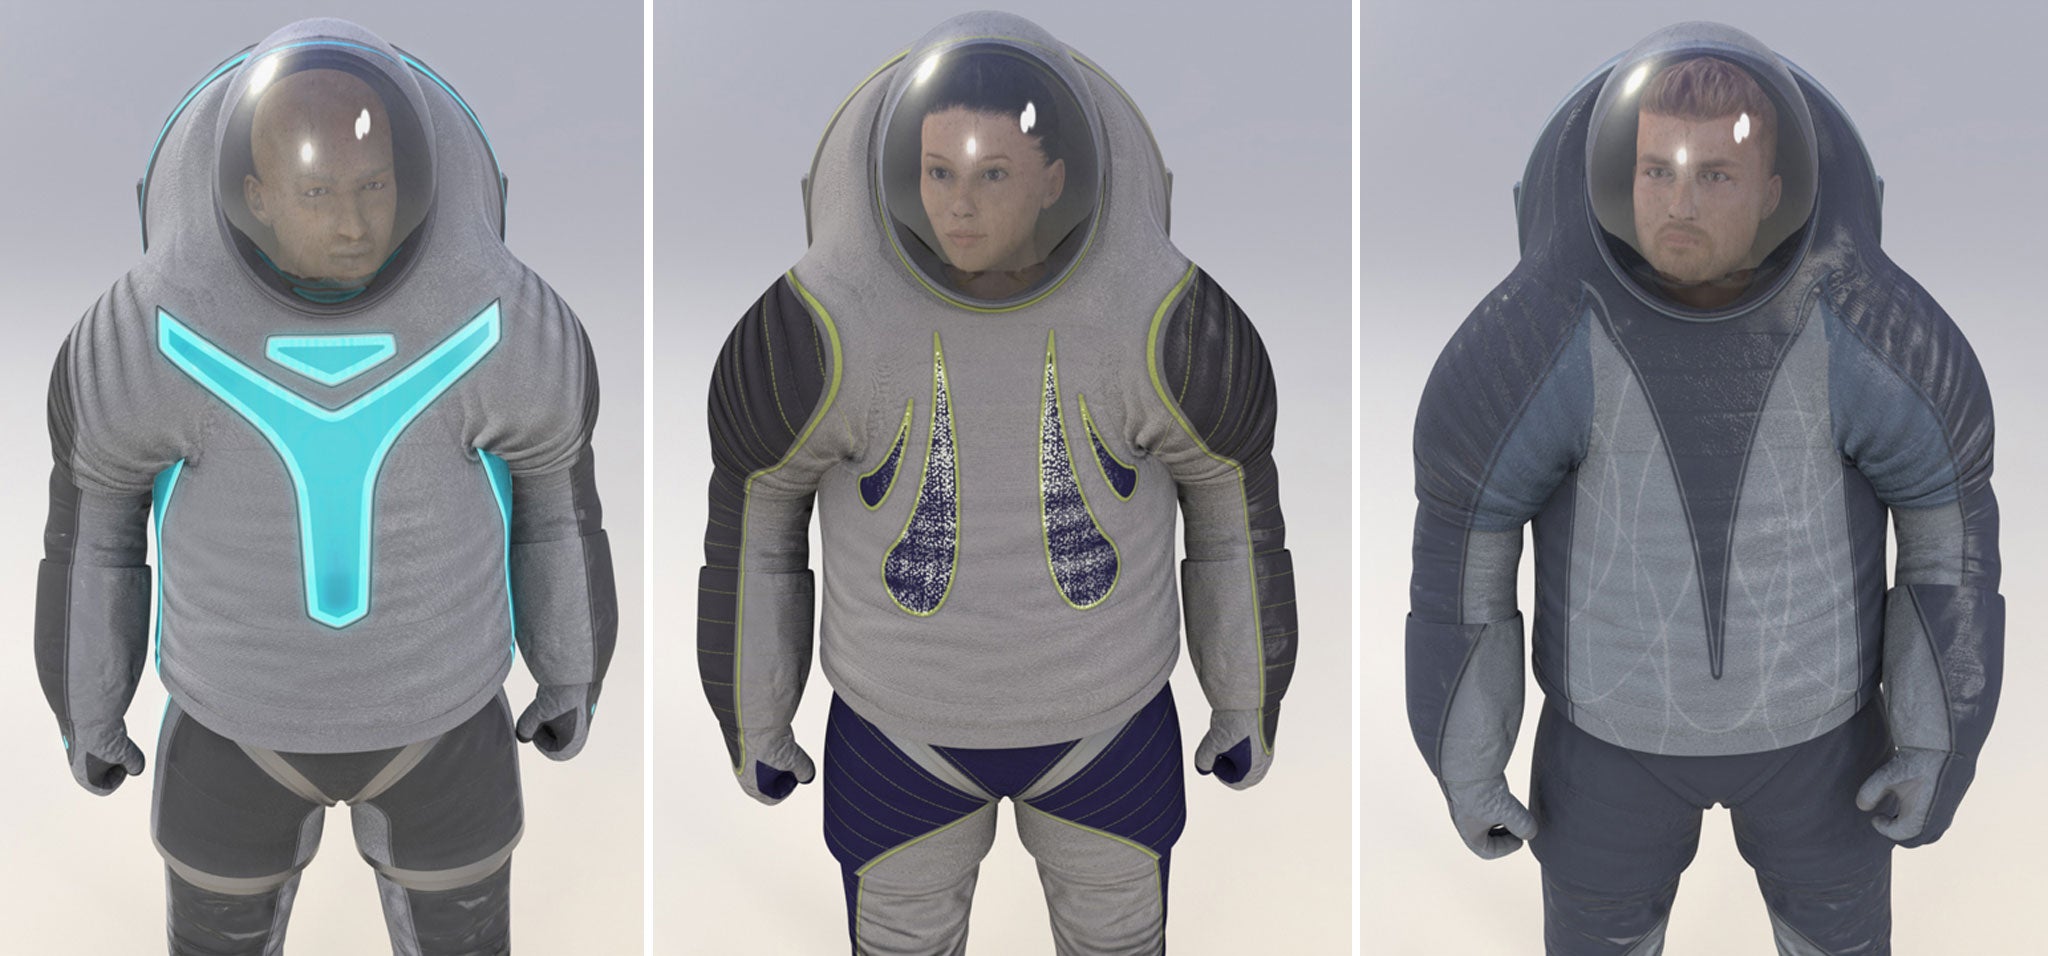 Nasa spacesuits - now with go faster stripes!